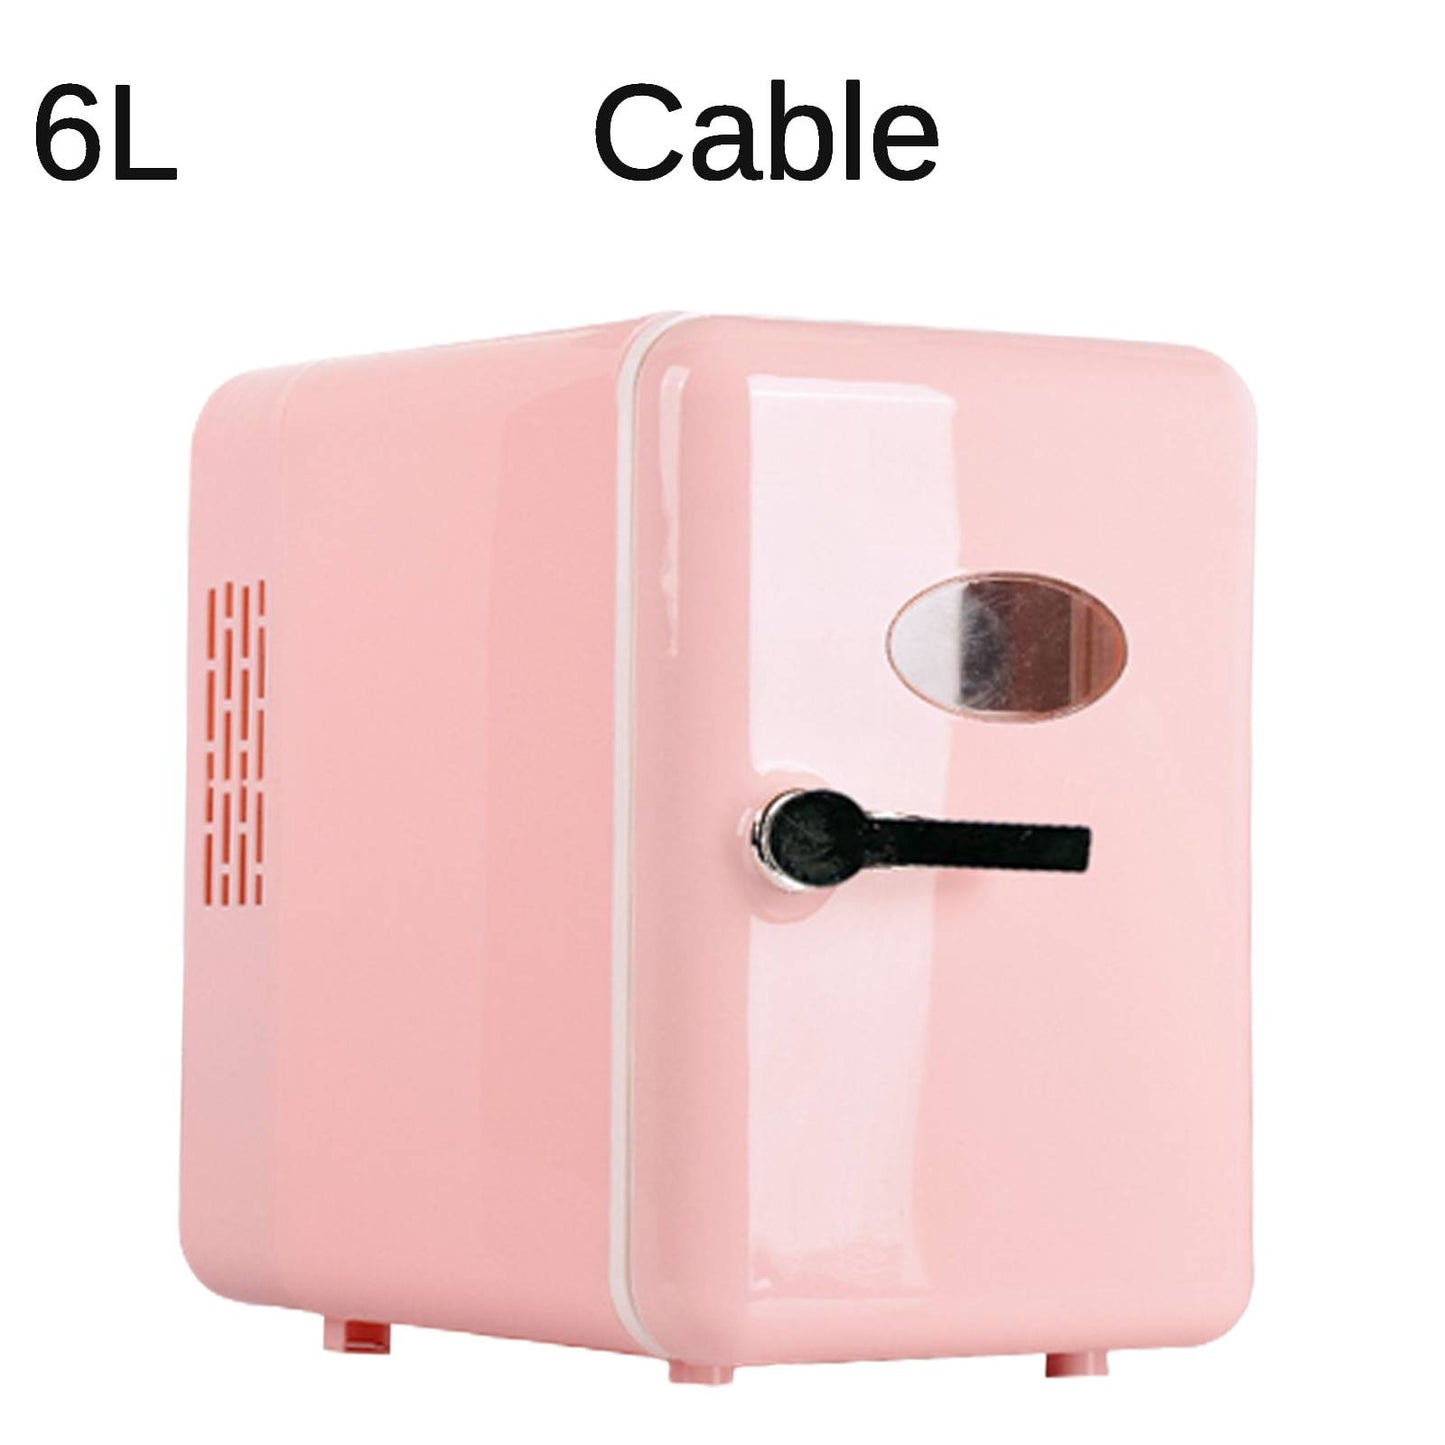 6L Portable Mini Fridge For Car - Camping Traveling Cooler and Warmer